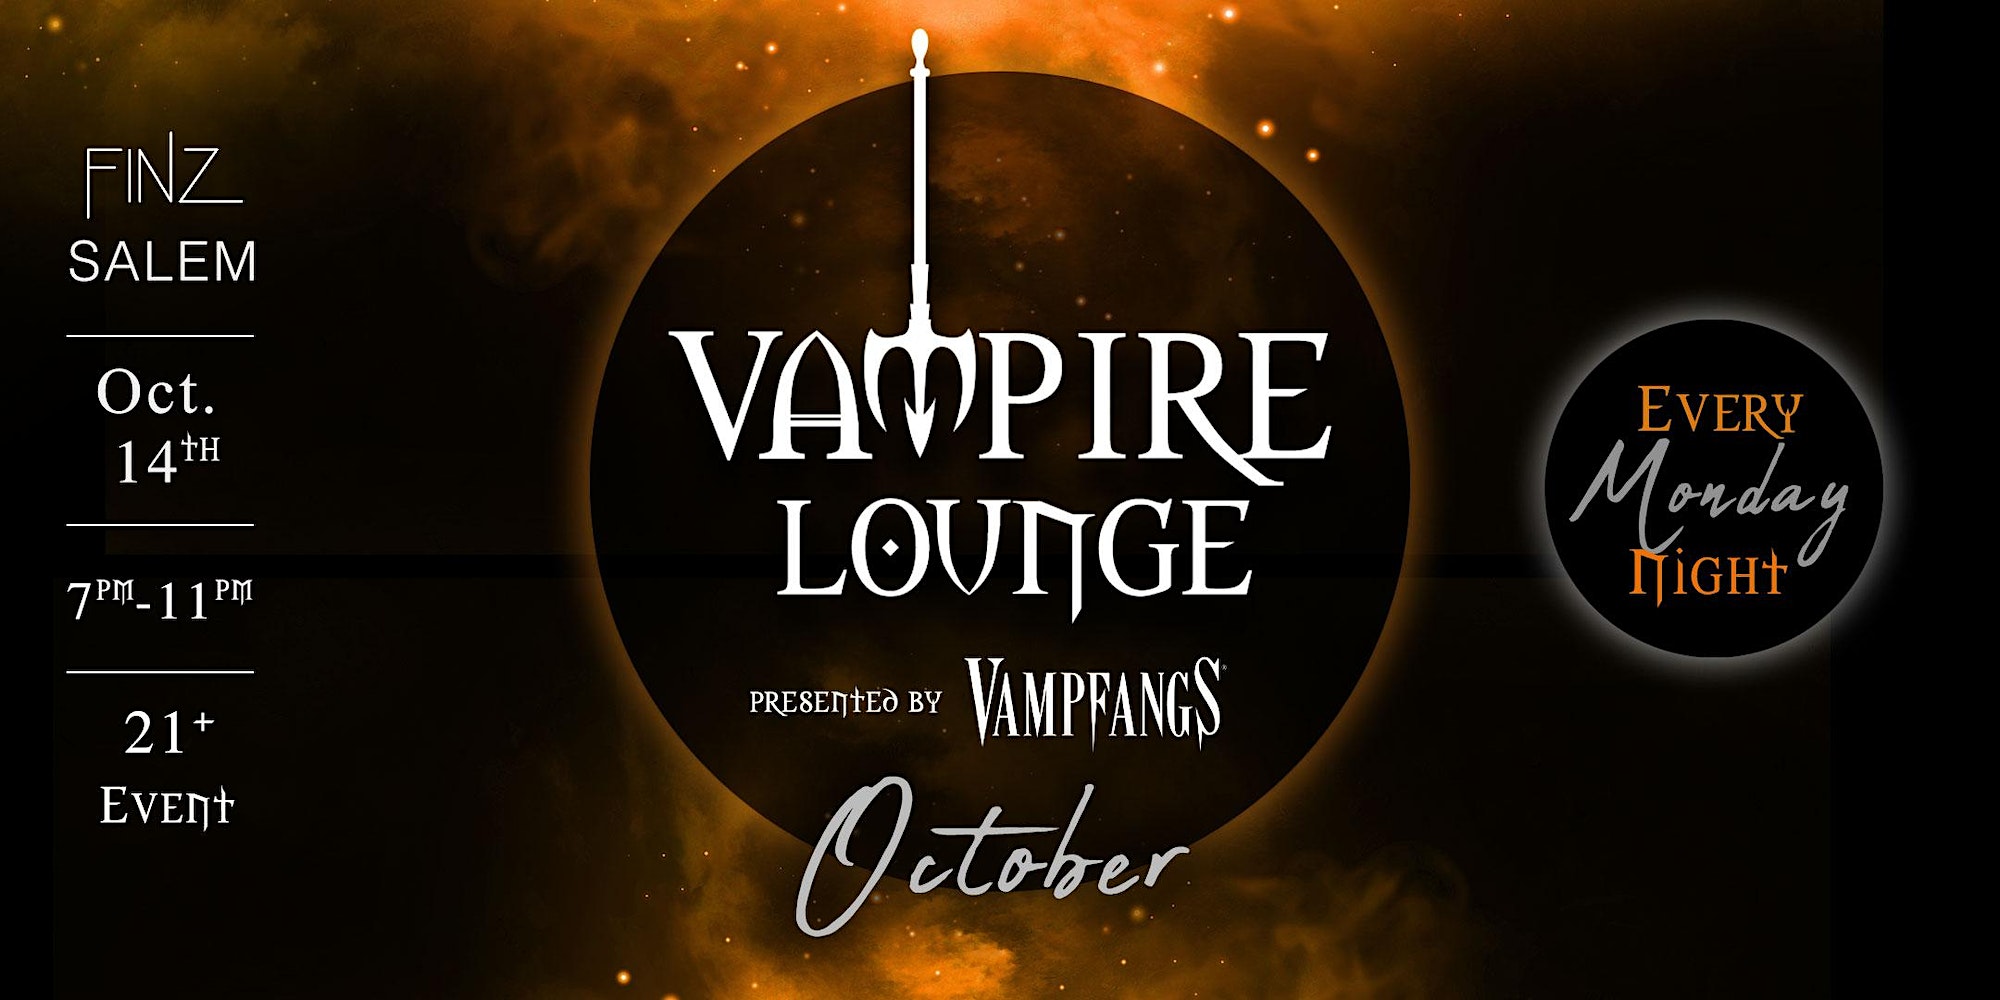 Experience chilling Halloween vibes at the Vampire Lounge this October. Witness an unforgettable spooky environment that perfectly captures the essence of this bewitching season, right at our Vampire Lounge. The unforgettable October night is waiting just for you!